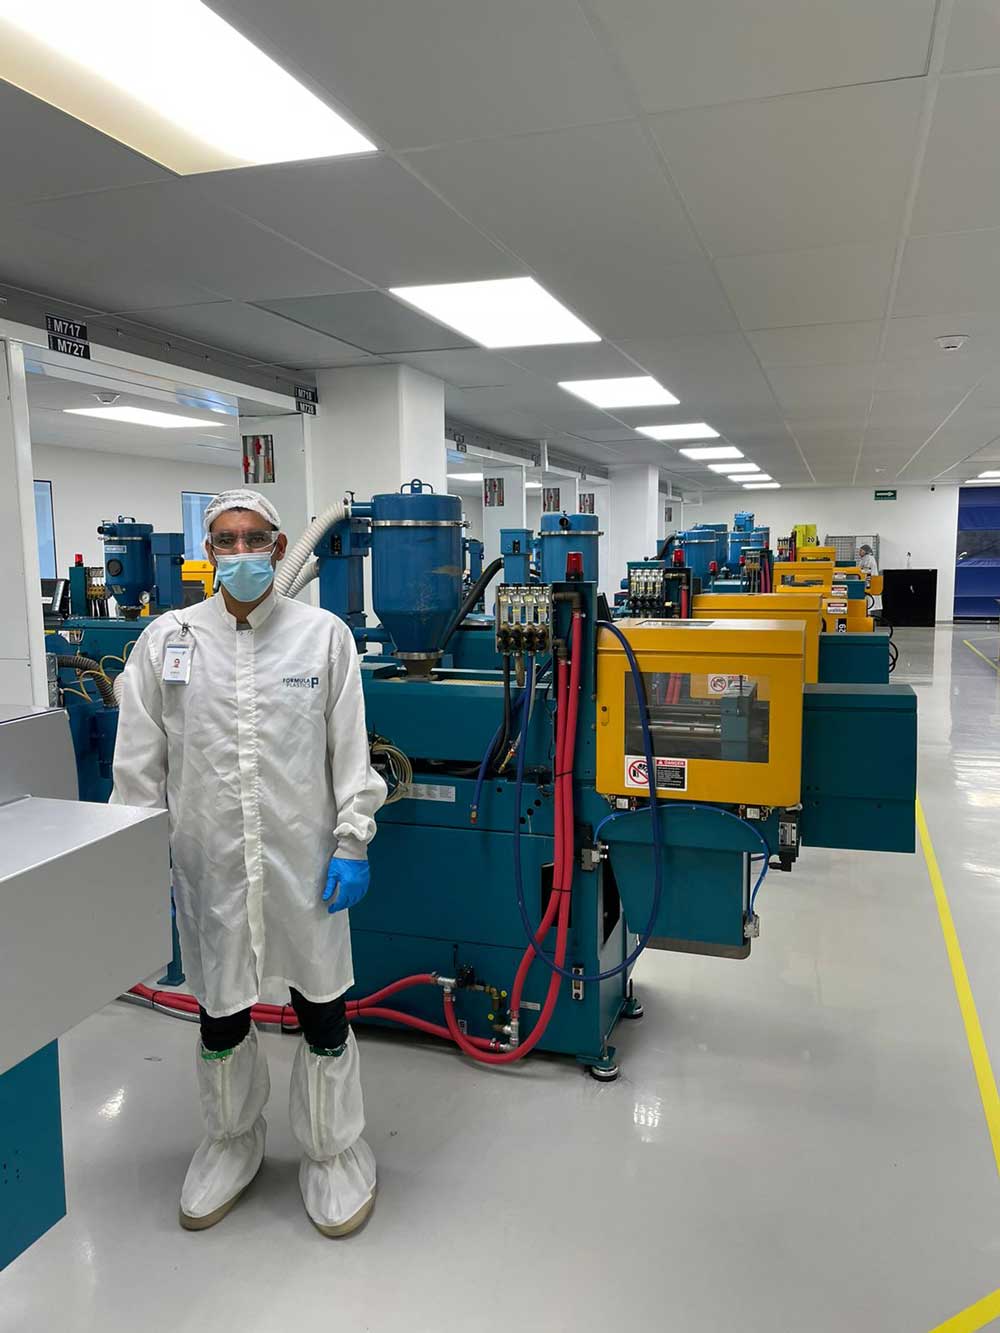 Arterex Medical clean room in Tecate, Mexico